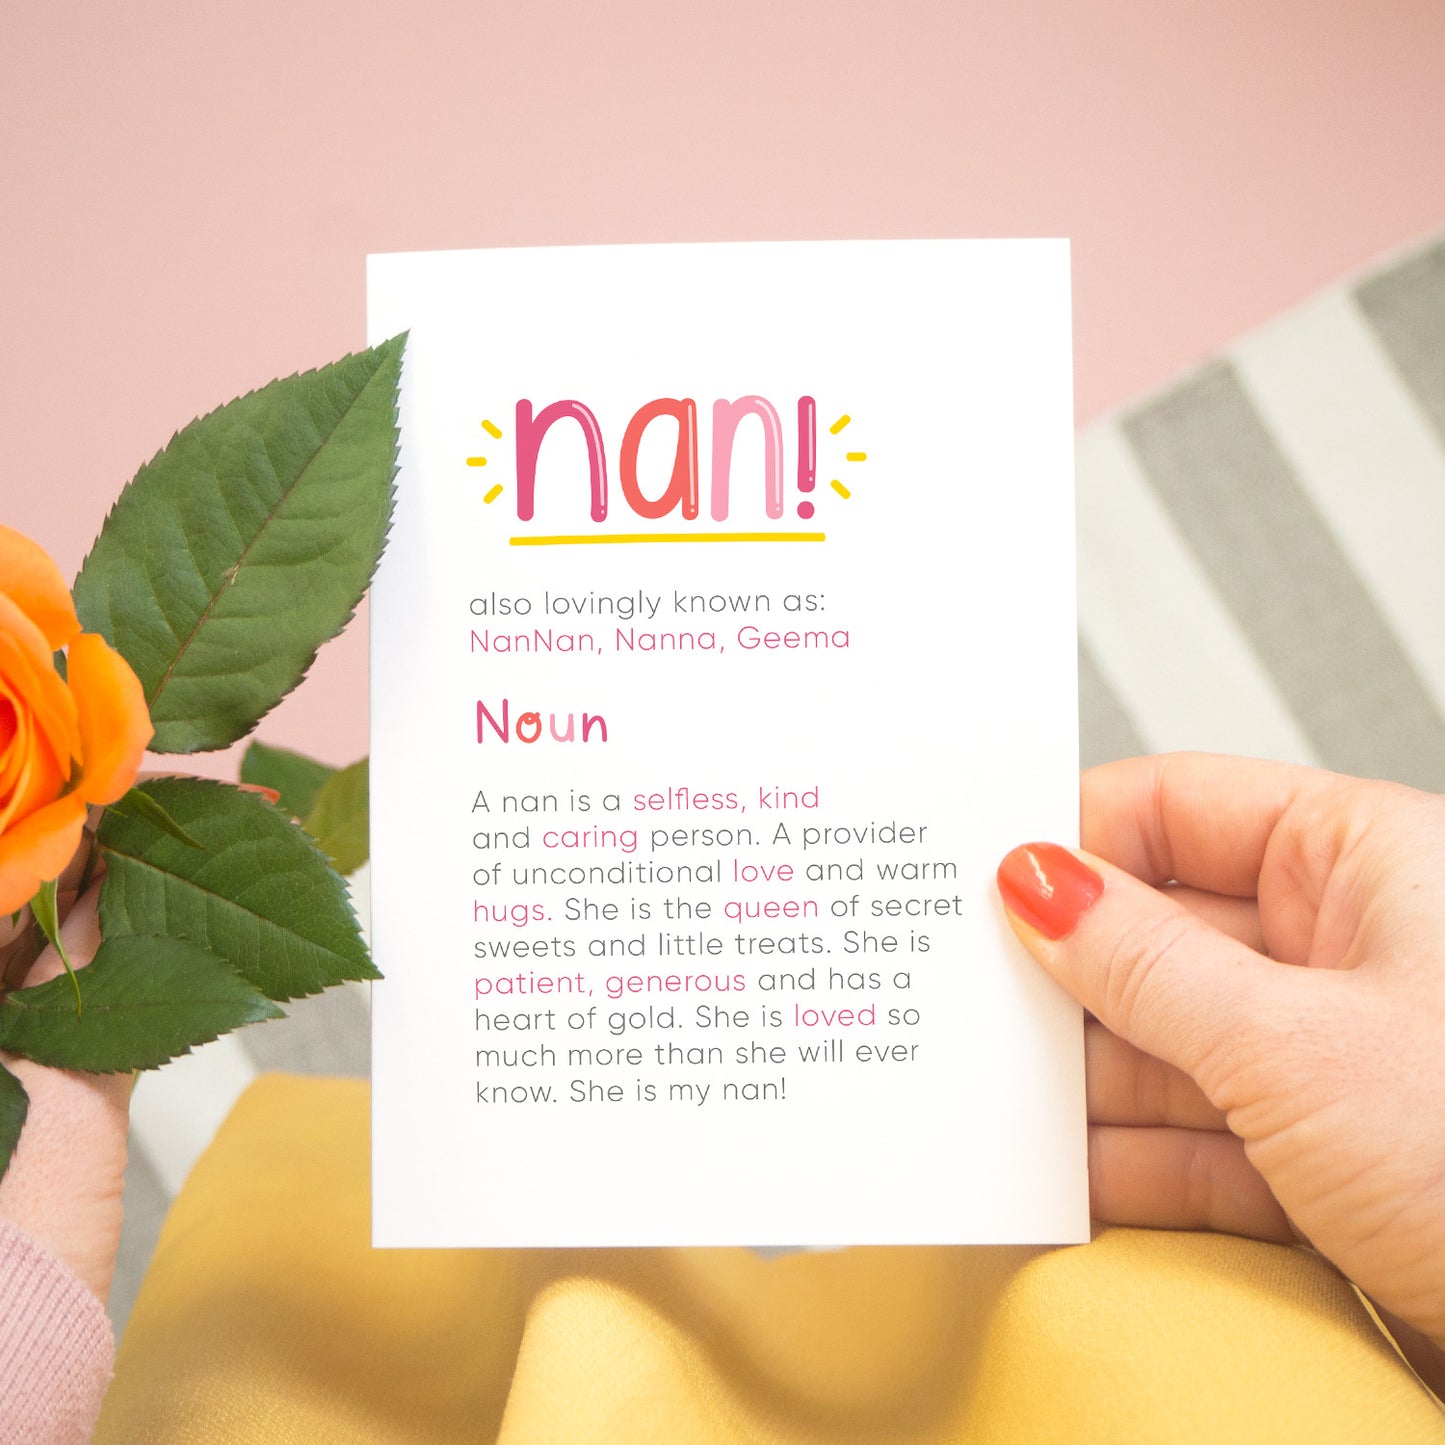 A personalised Nan dictionary definition card being held over a pink background with a grey and white striped rug, yellow skirt and a single orange rose to the left. The card features hand drawn writing in varying tones of pink and a definition of what a nan  is with key words highlighted in pink.